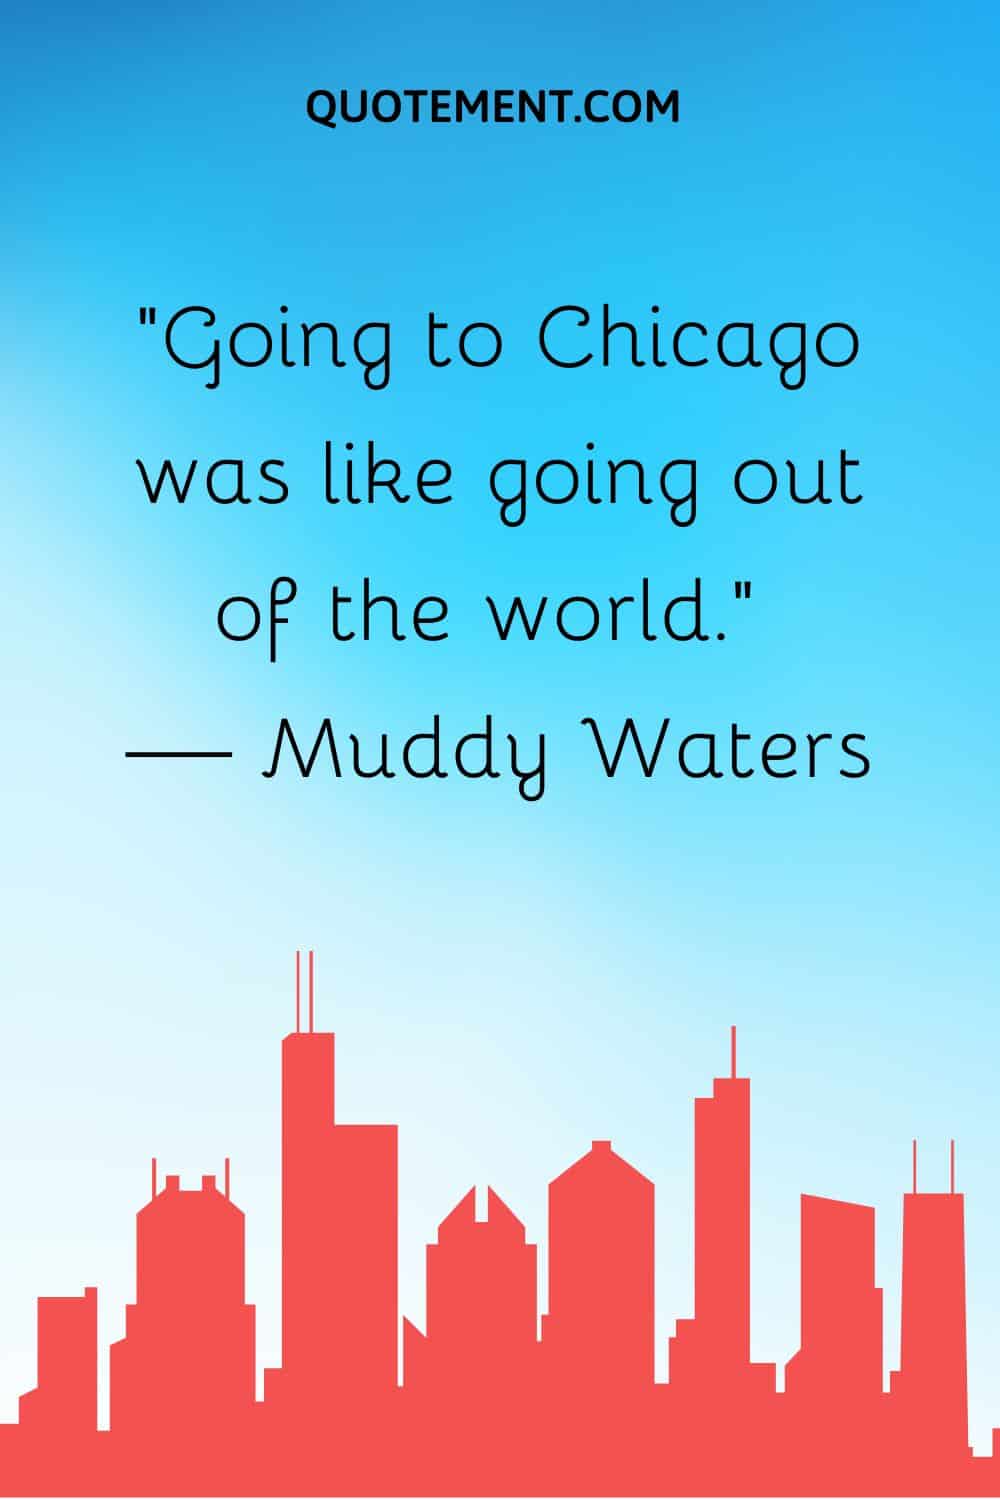 “Going to Chicago was like going out of the world.” — Muddy Waters